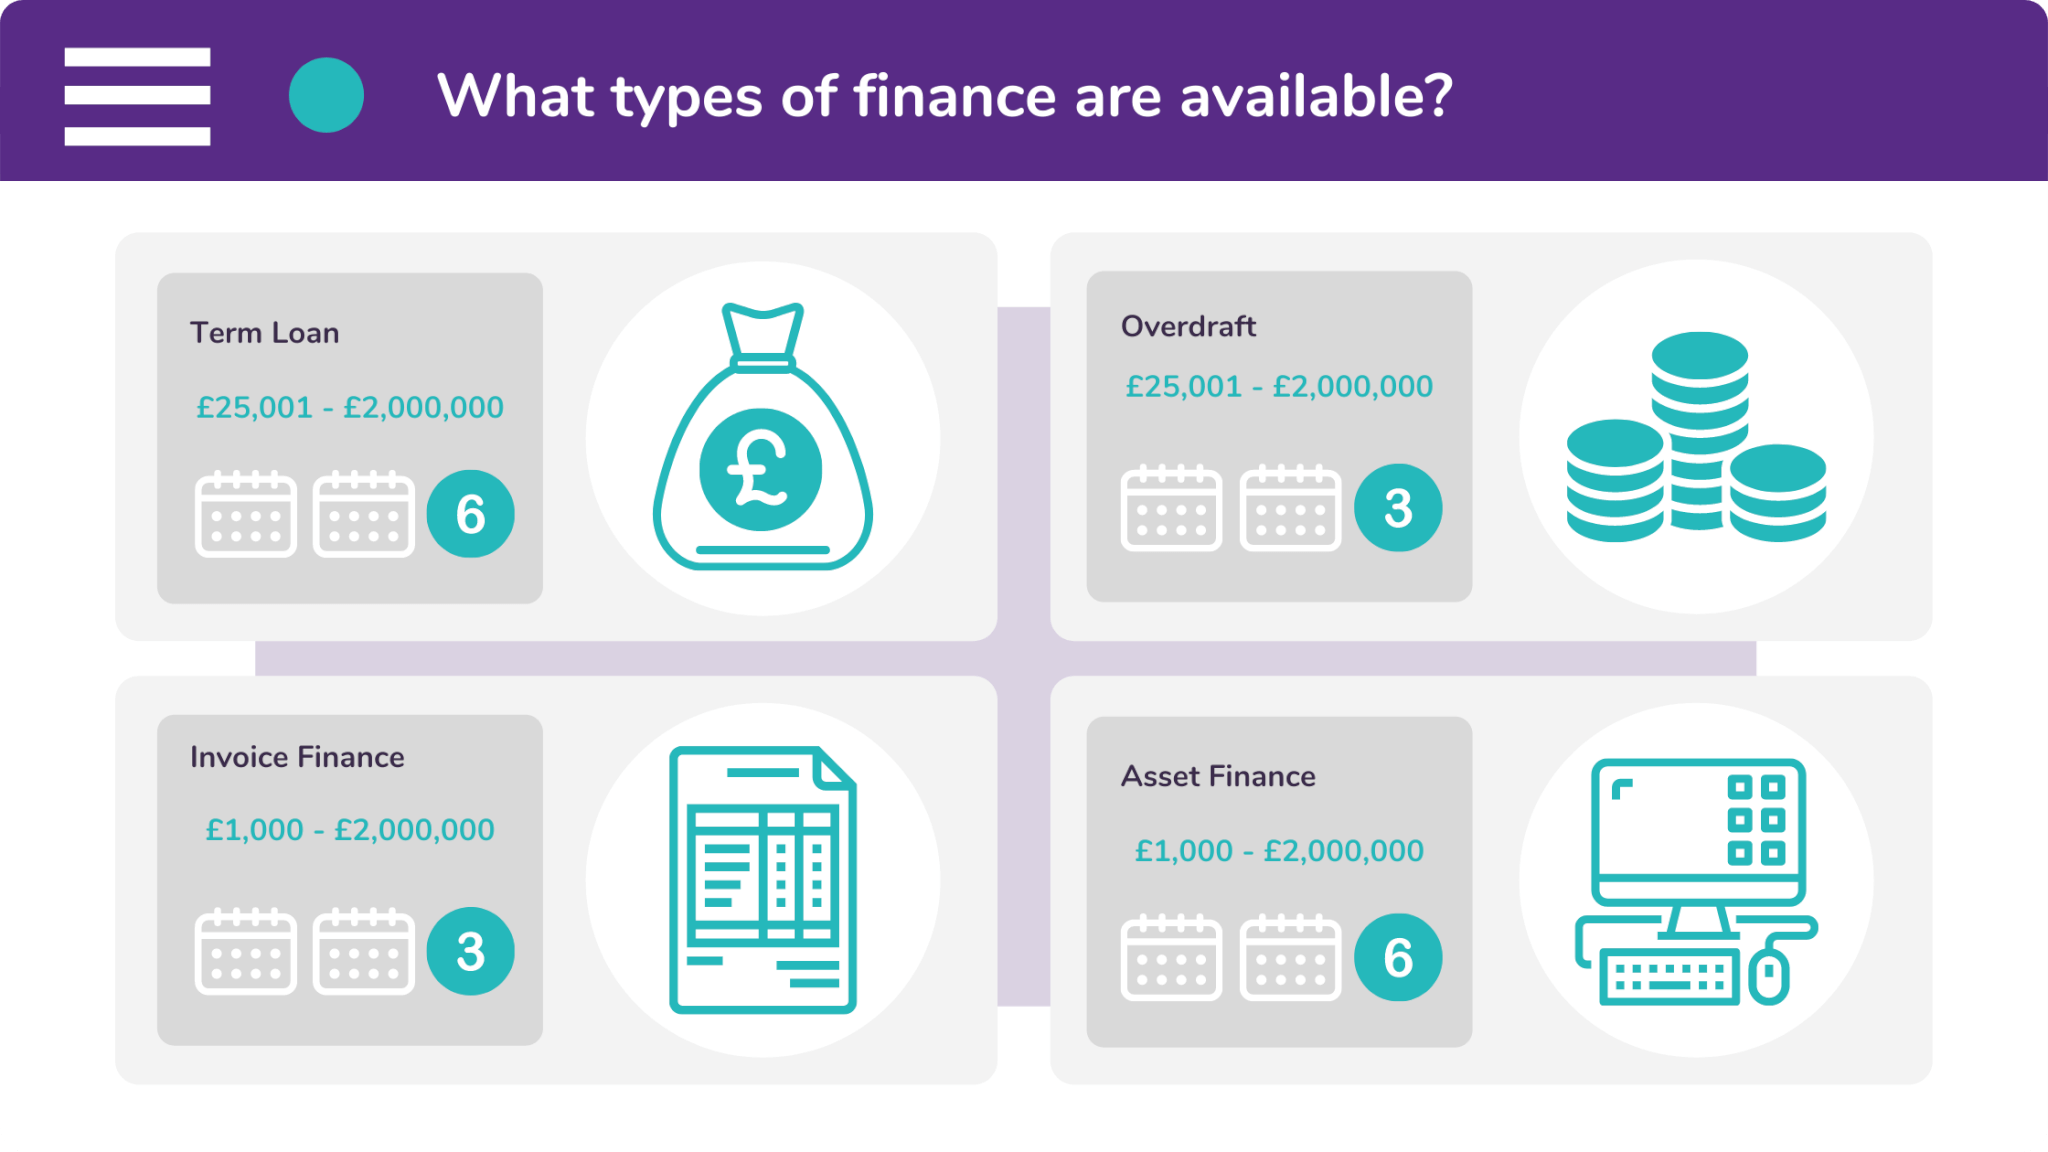 Recovery Loan Scheme facilities can include term loans, asset finance, invoice finance, and overdrafts.